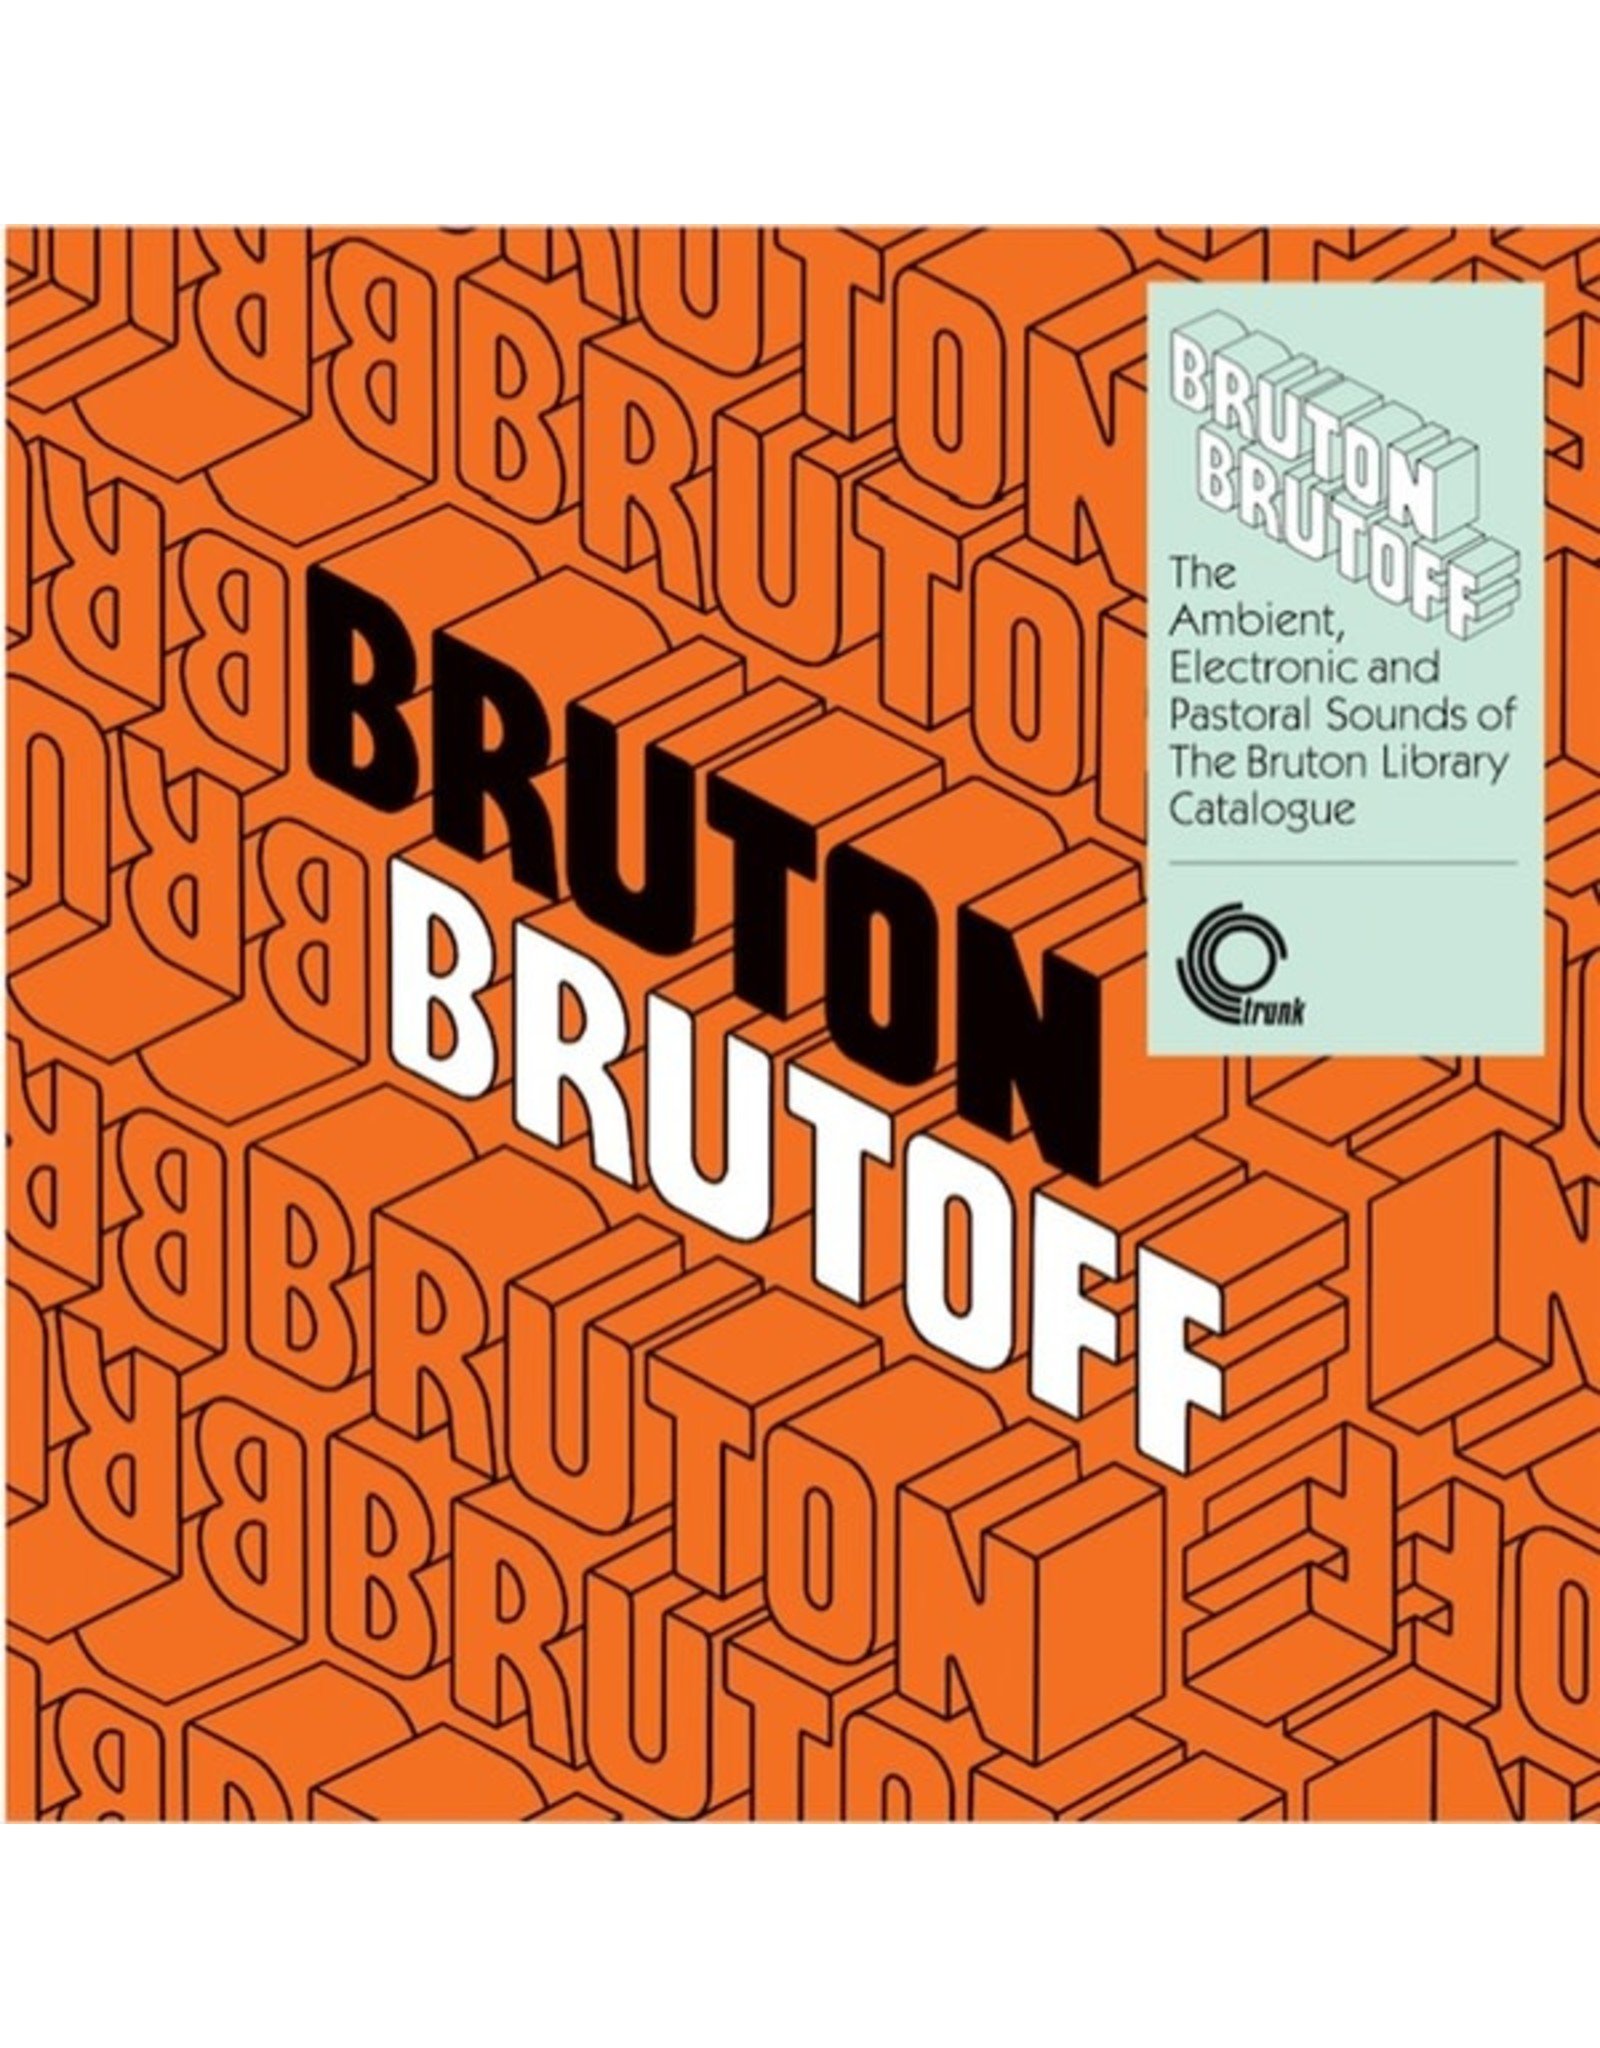 Trunk Various: Bruton Brutoff: The Ambient, Electronic and Pastoral Sounds of The Bruton Library Catalogue LP